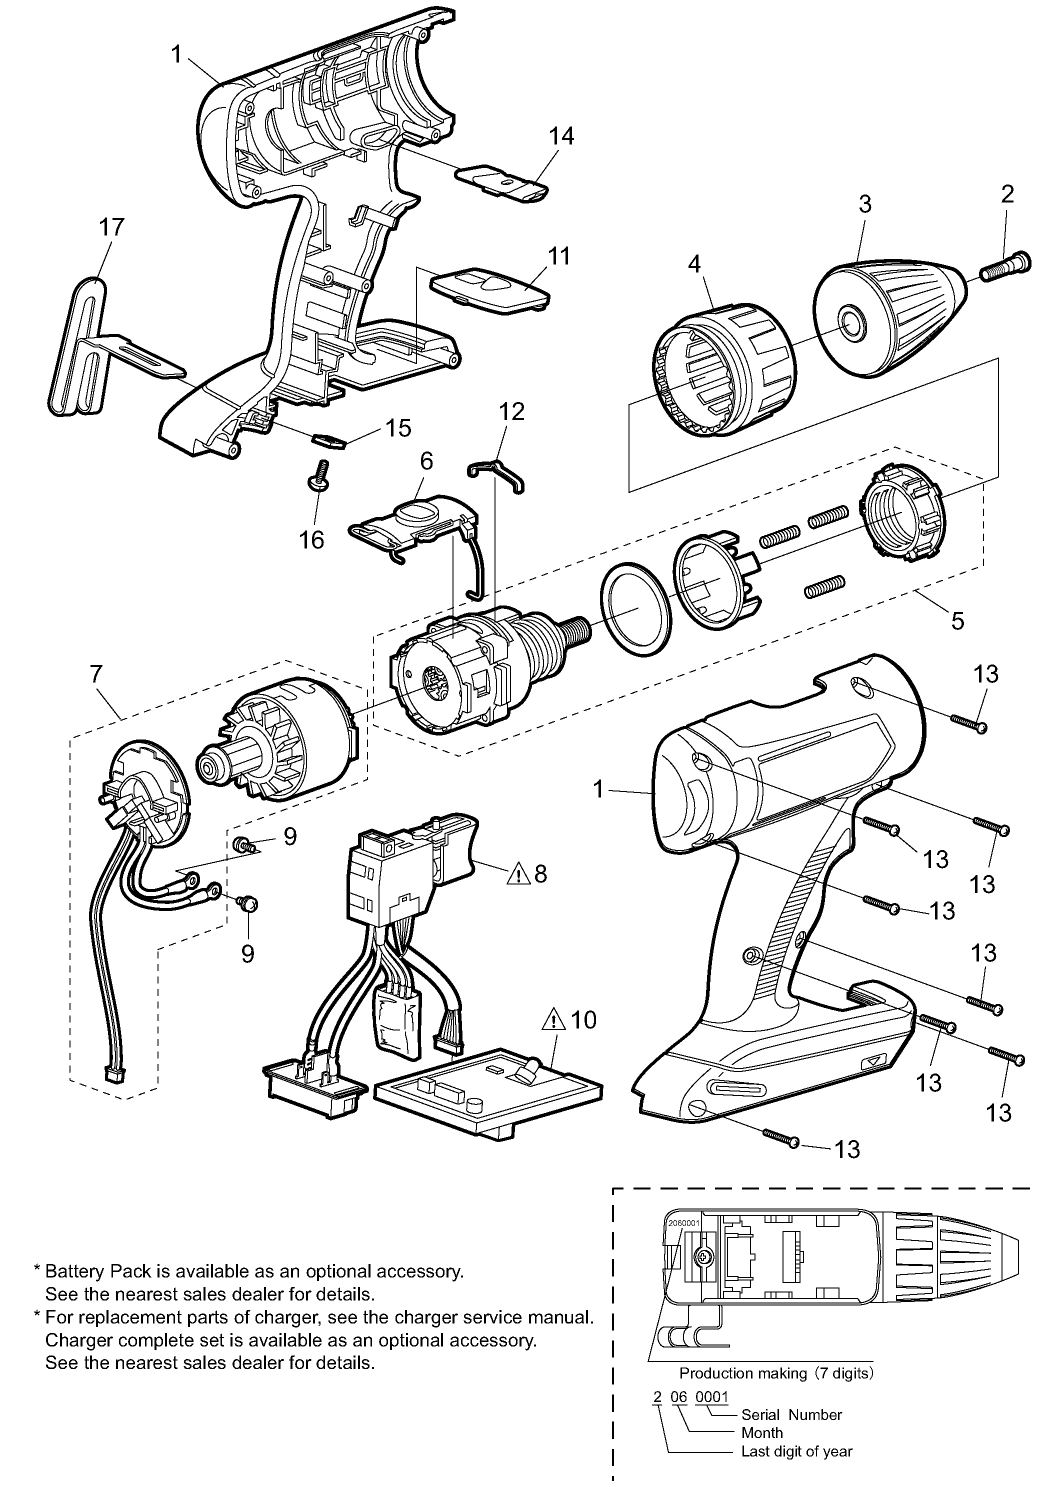 EY74A1: Exploded View